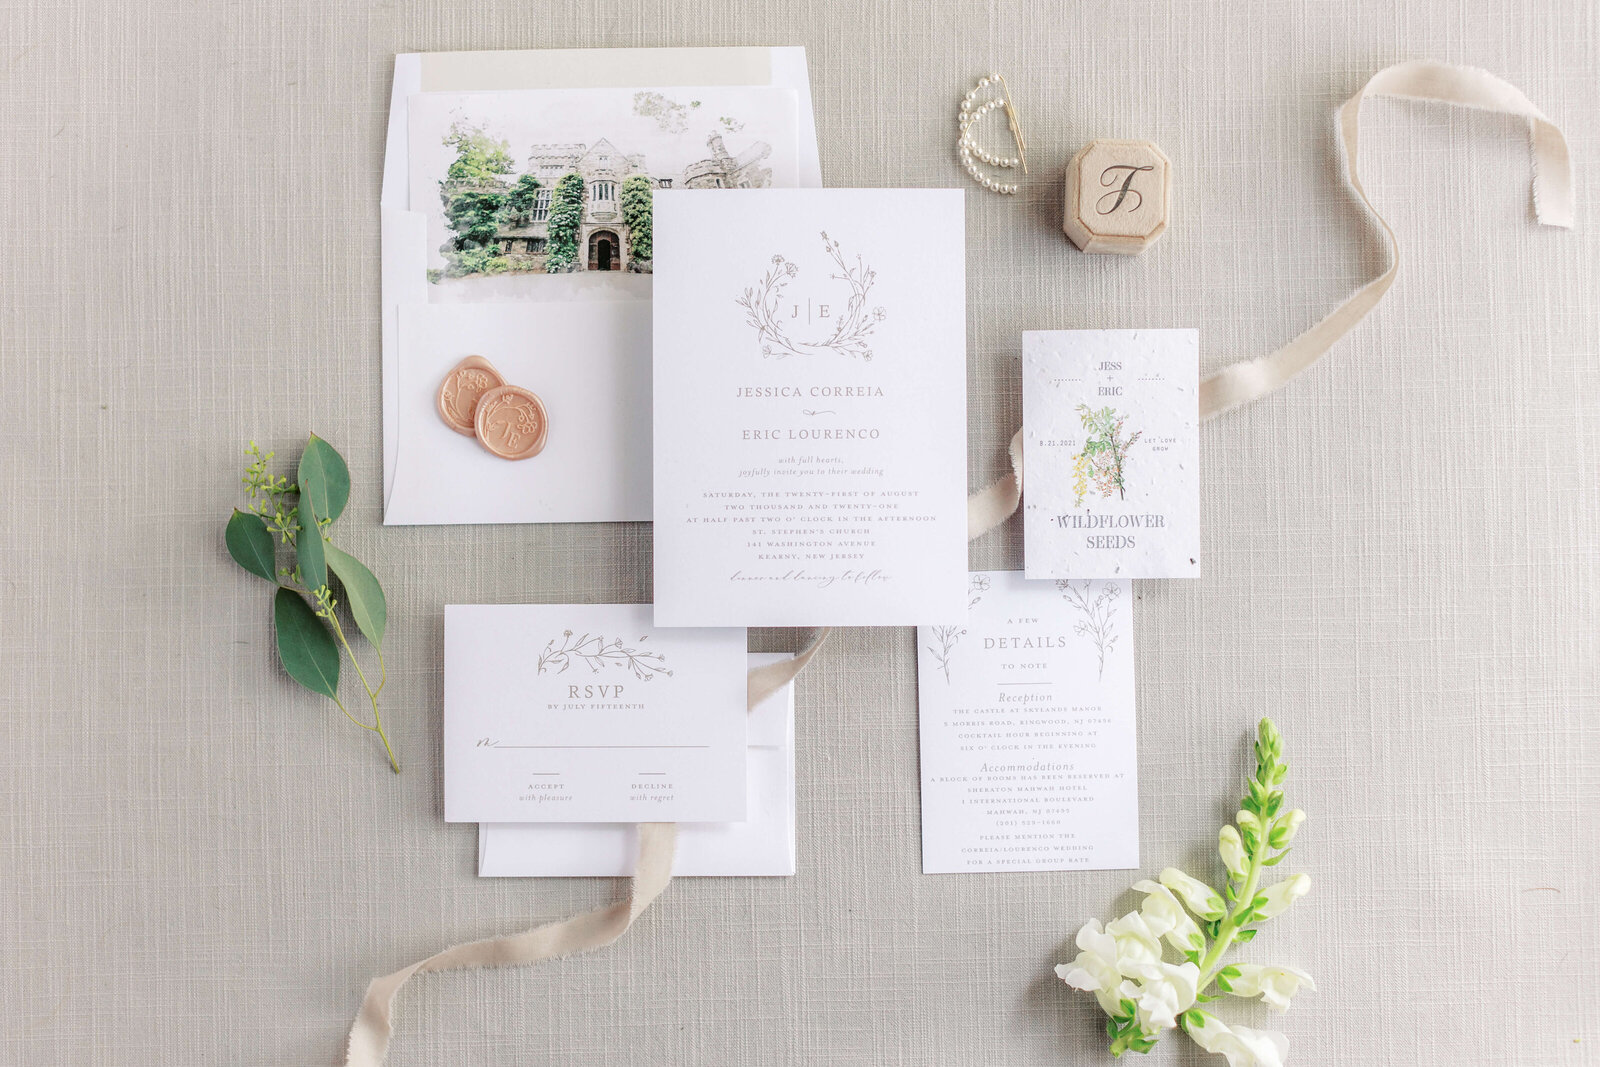 Professionally designed custom invitation suite with watercolor art and custom wax seal.